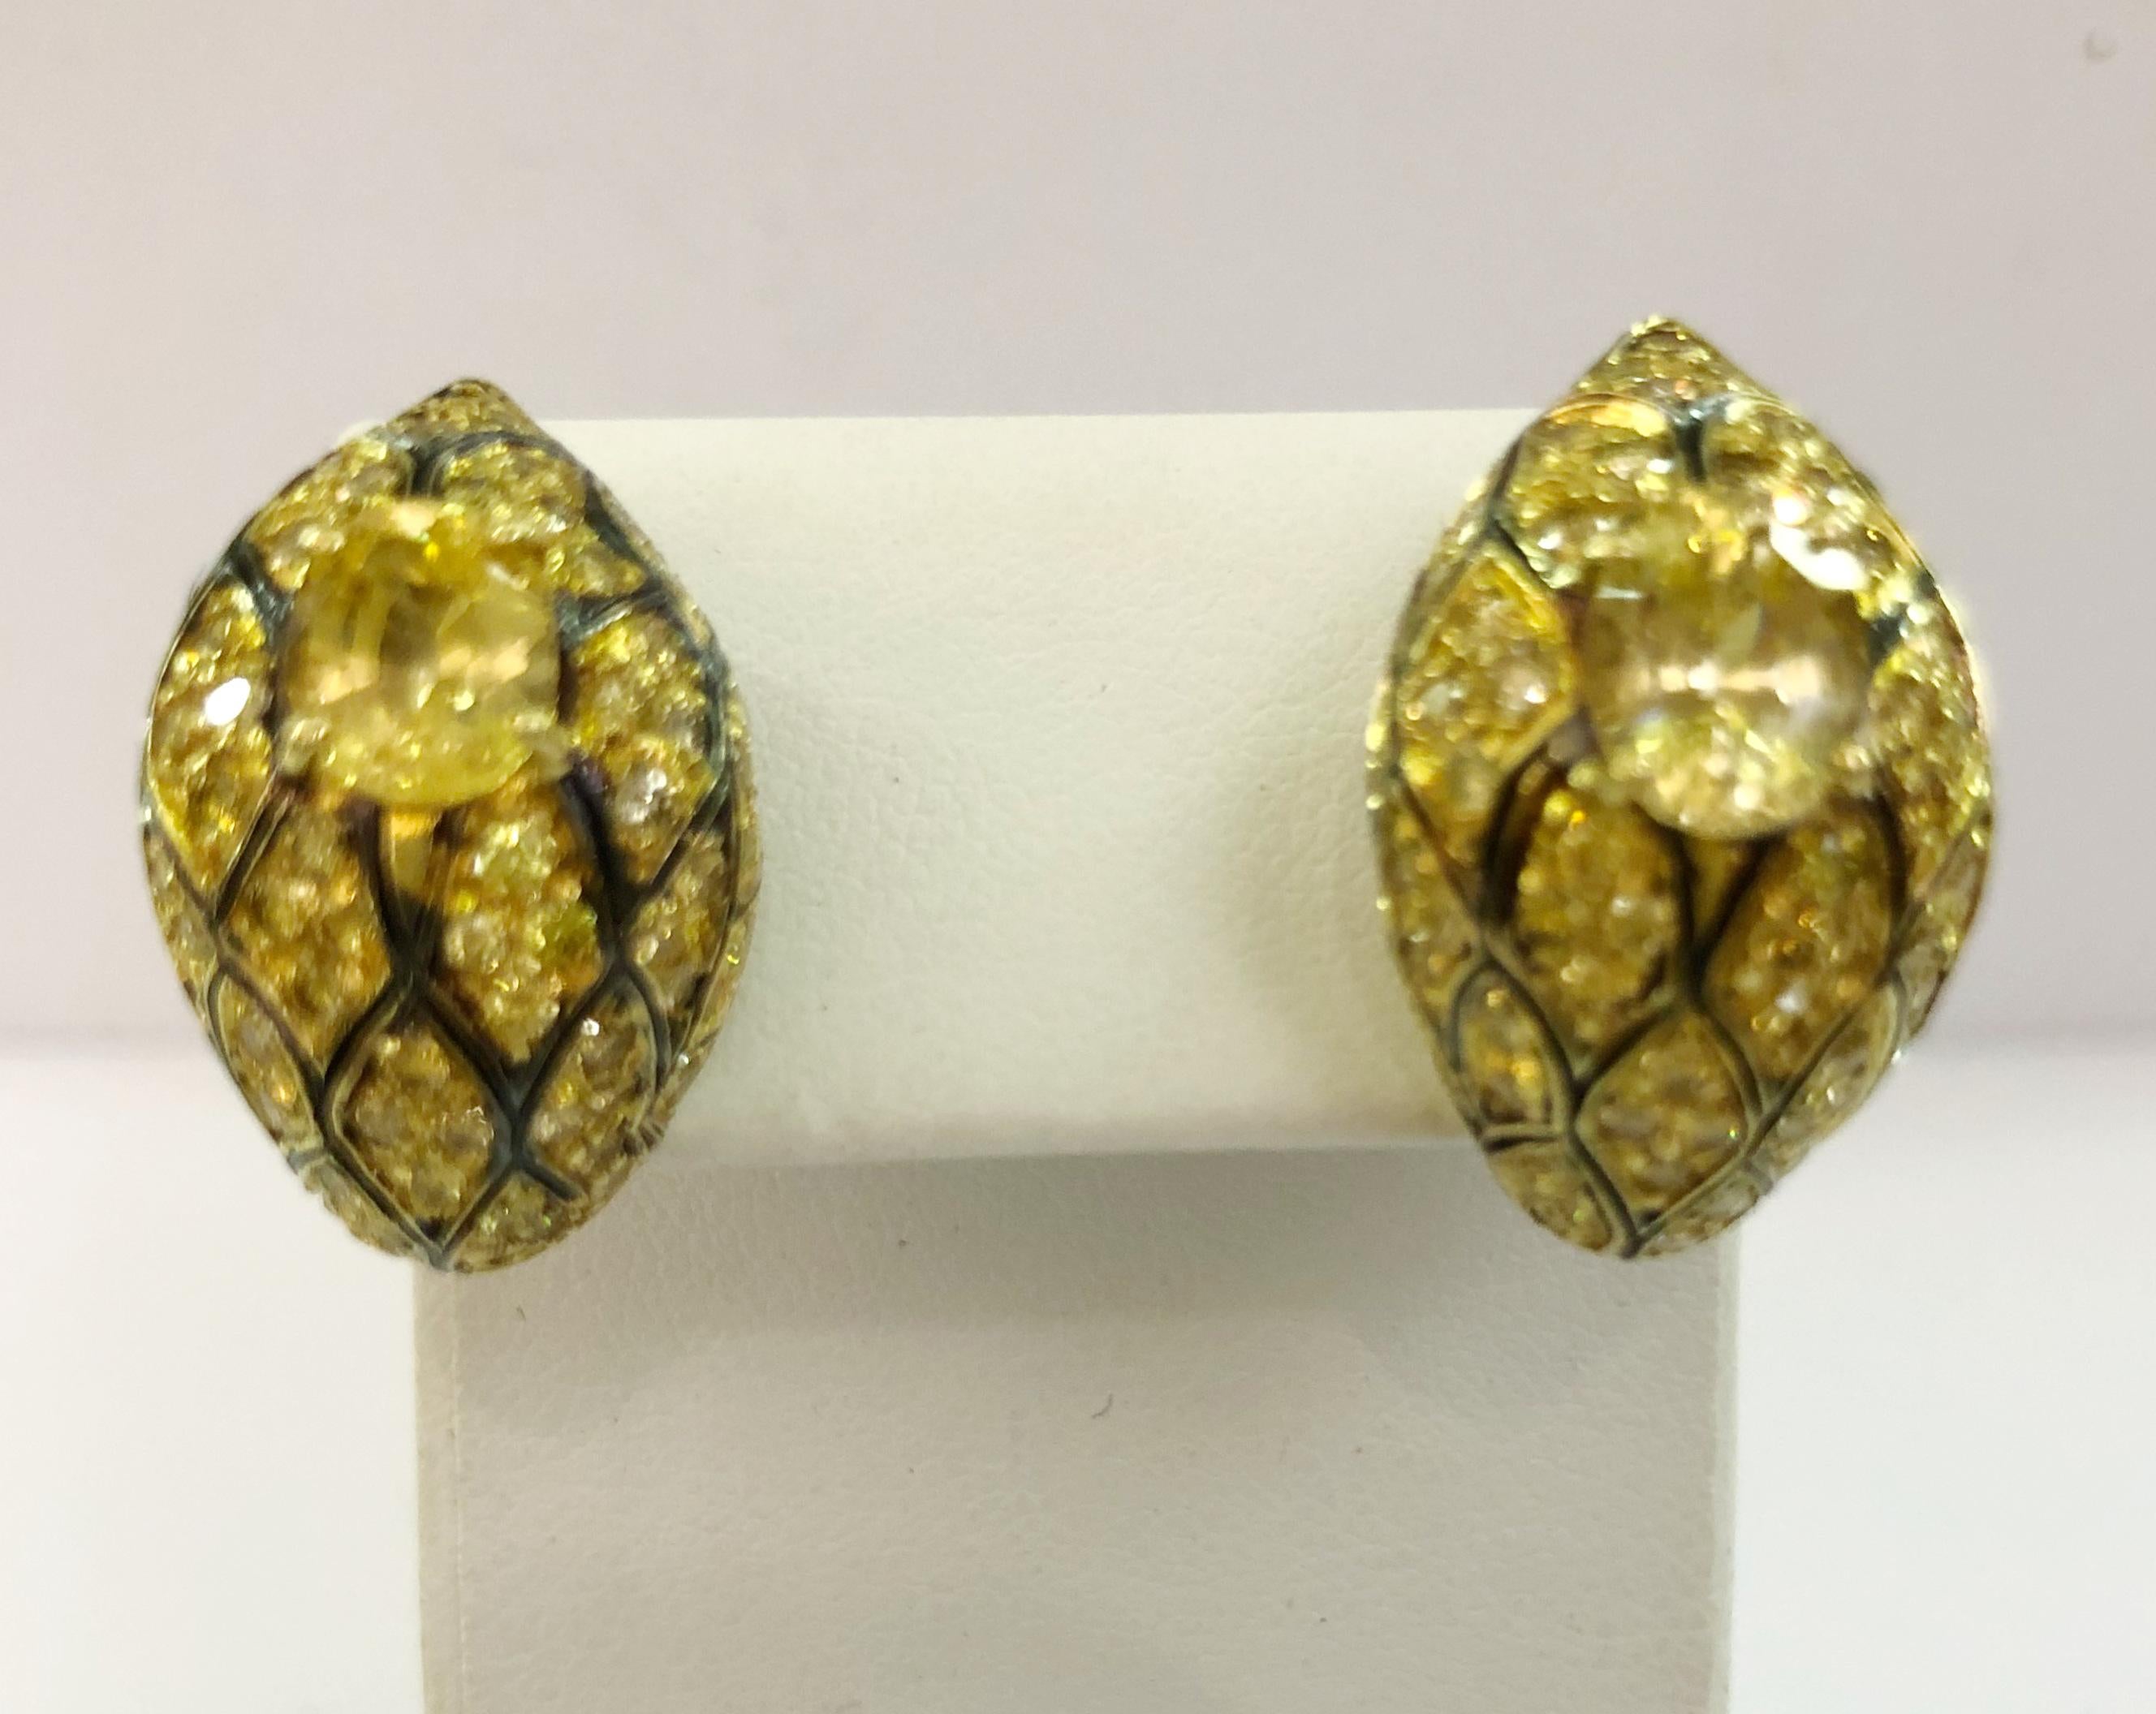 Pair of vintage 18 karat yellow gold earrings with yellow corundum for a total of 3 karats and brilliant diamonds for a total of 2.2 karats, Italy 1980-1990s